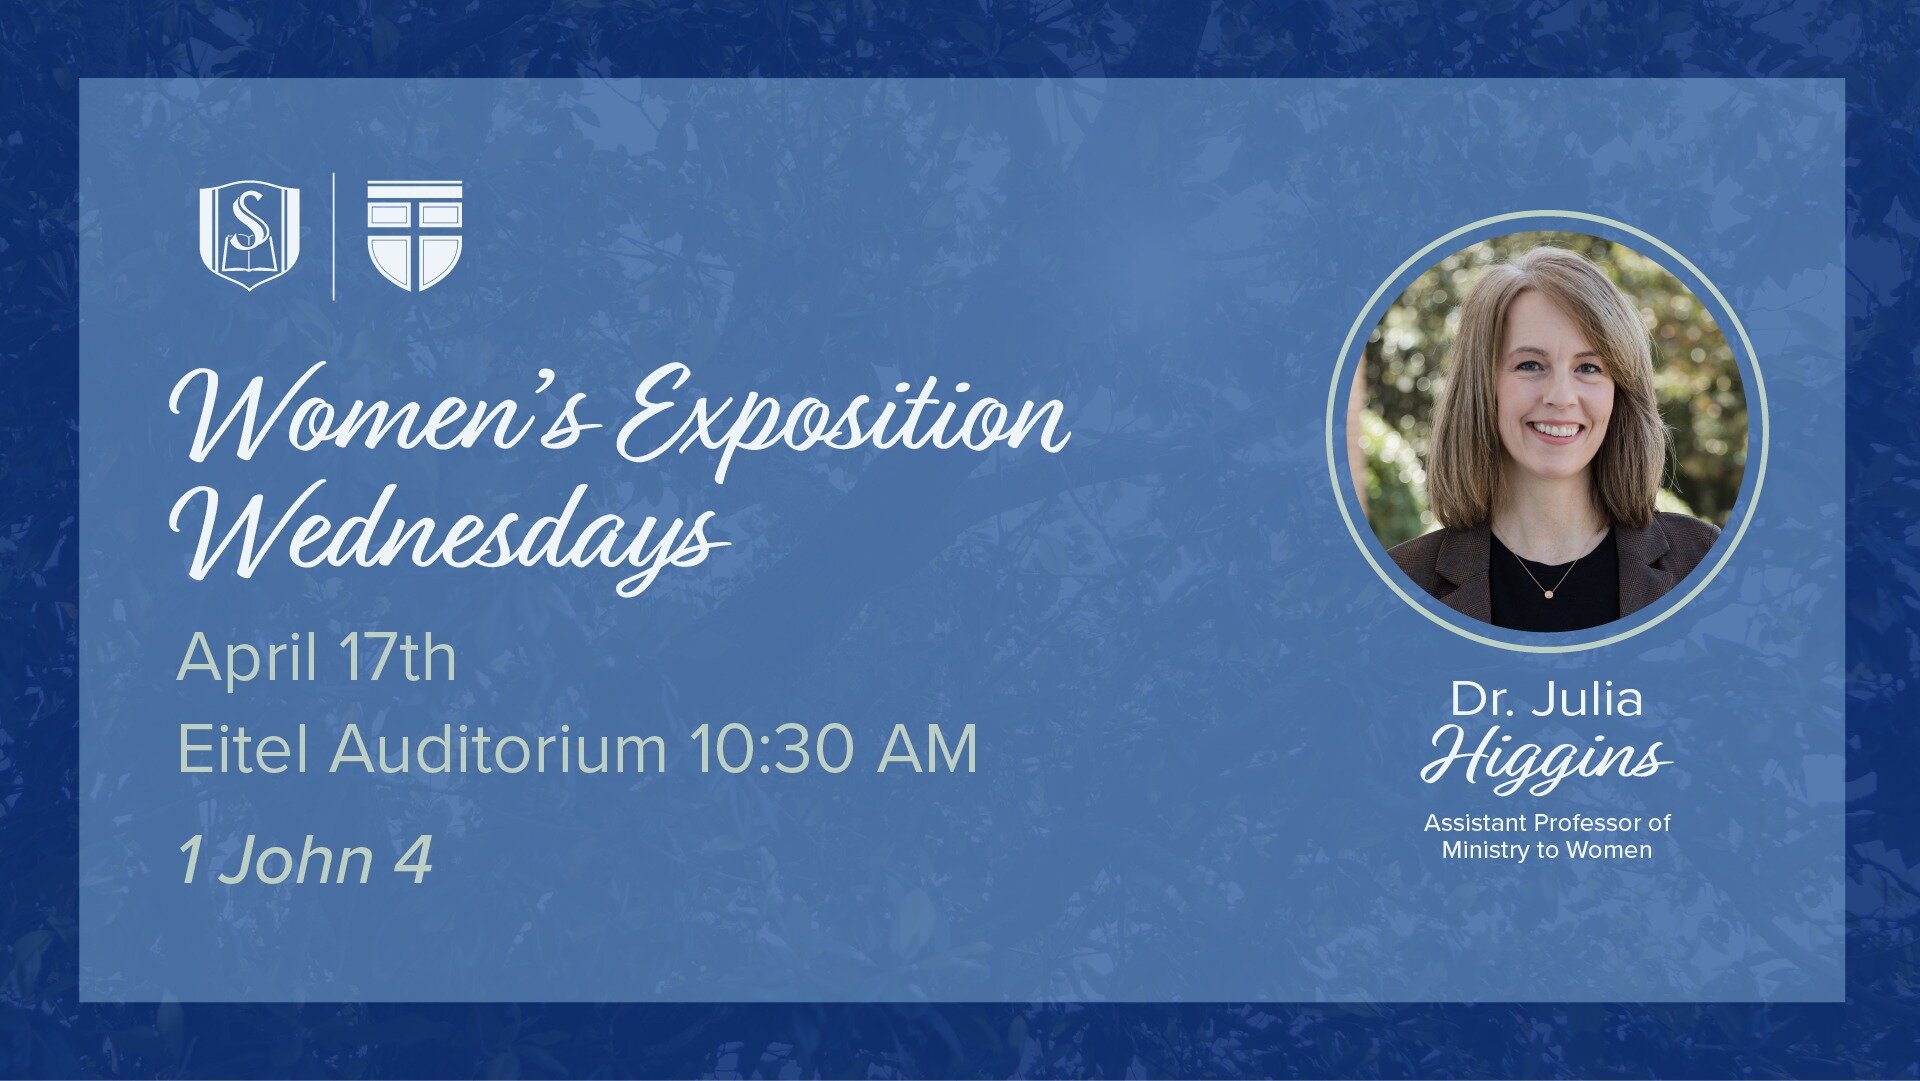 Hey ladies, join us April 17th for Women's Exposition Wednesday! Dr. Julia Higgins will be teaching from 1 John 4. Join us for a time of worship and learning from Scripture!